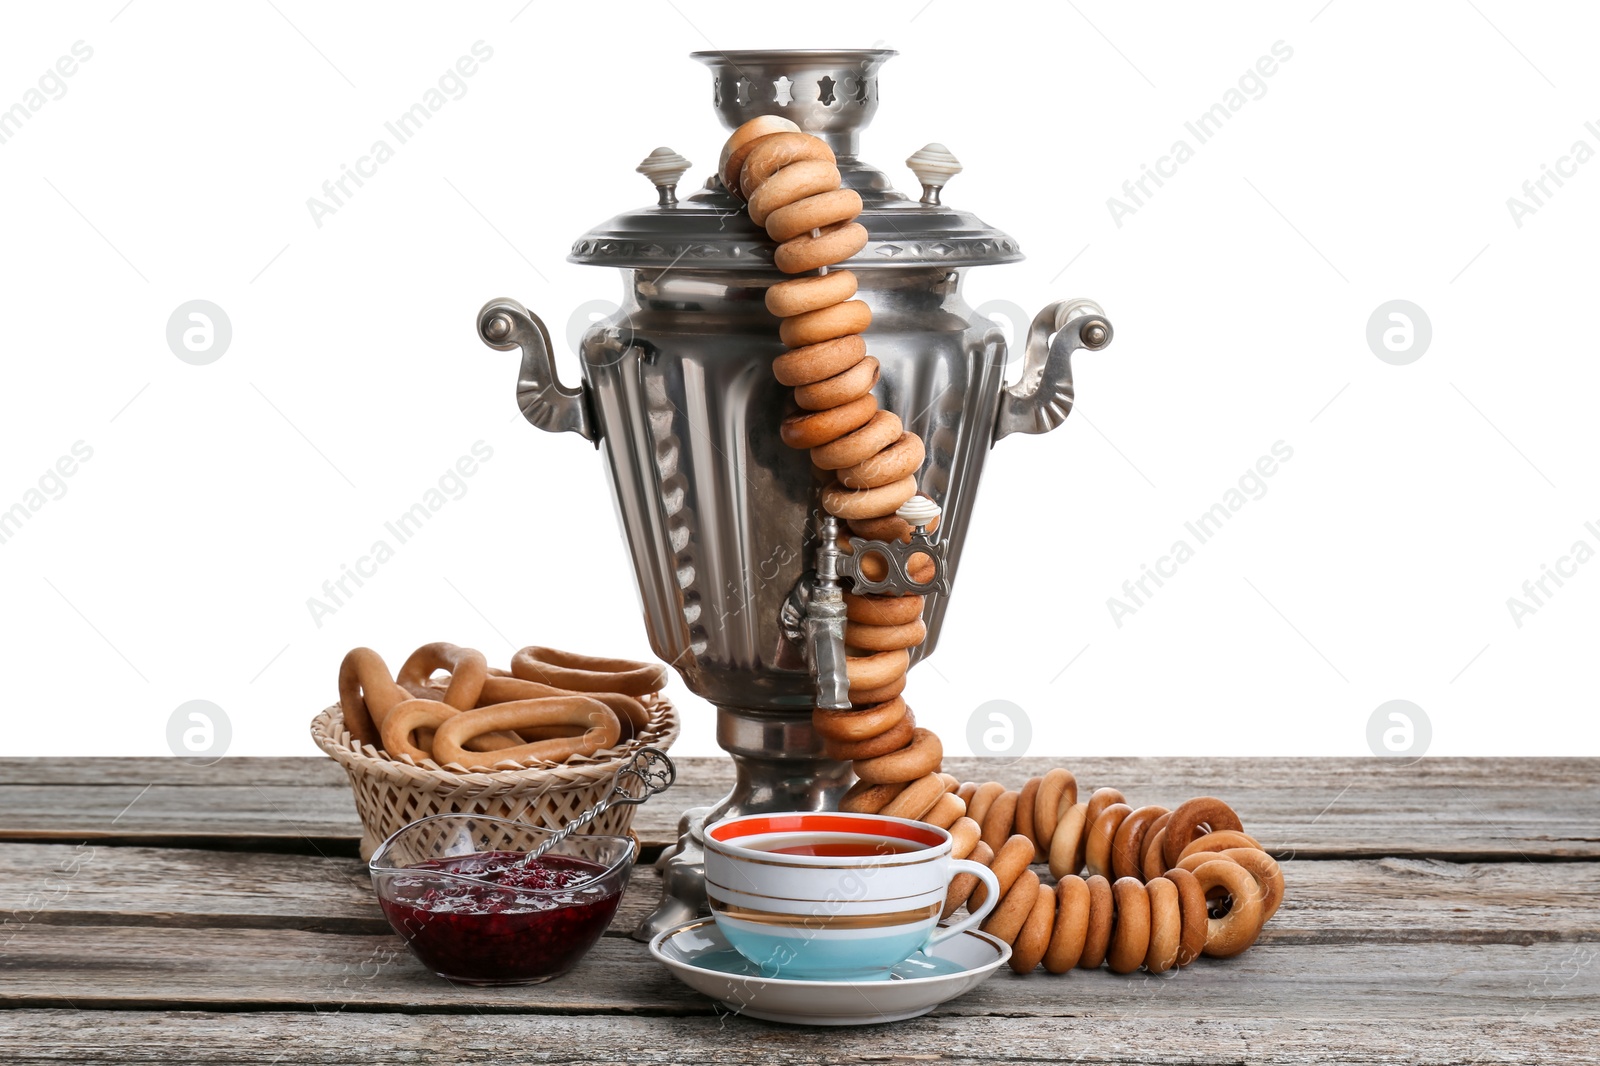 Photo of Samovar with hot tea, jam and delicious ring shaped Sushki (dry bagels) on table against white background